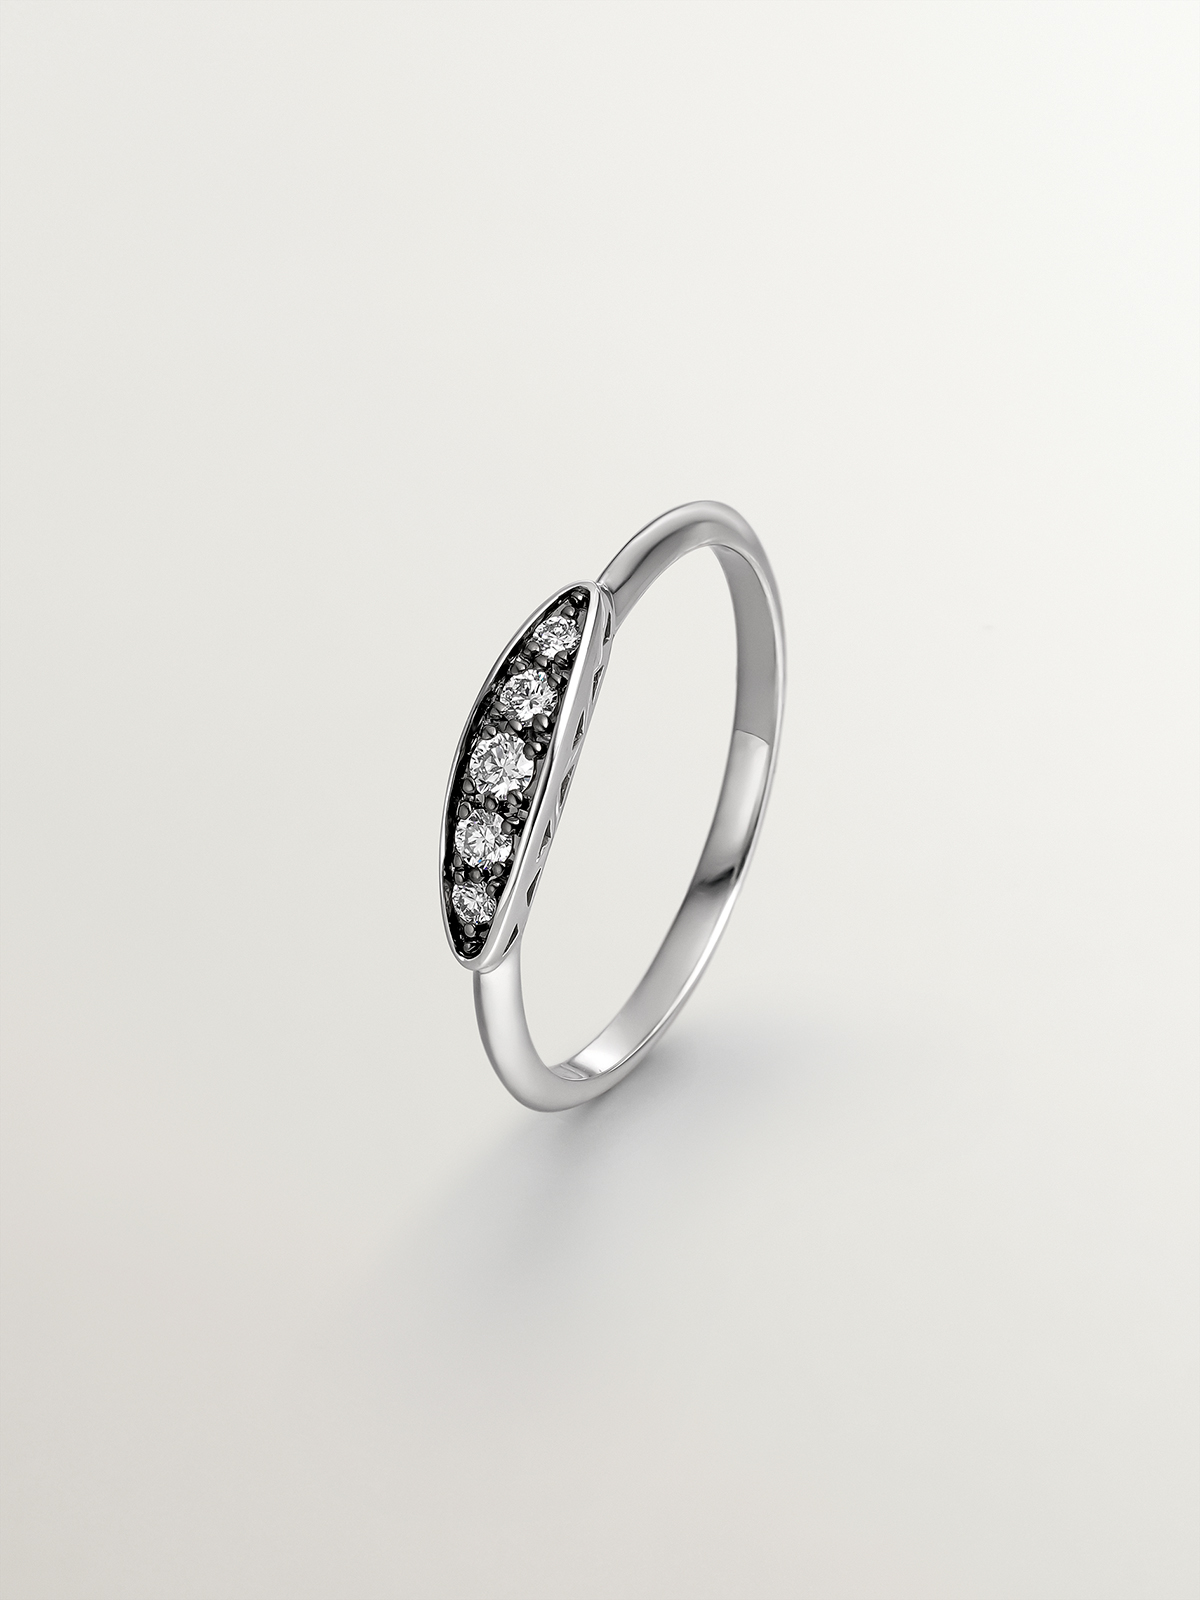 18K white gold ring with aged effect and brilliant cut diamond